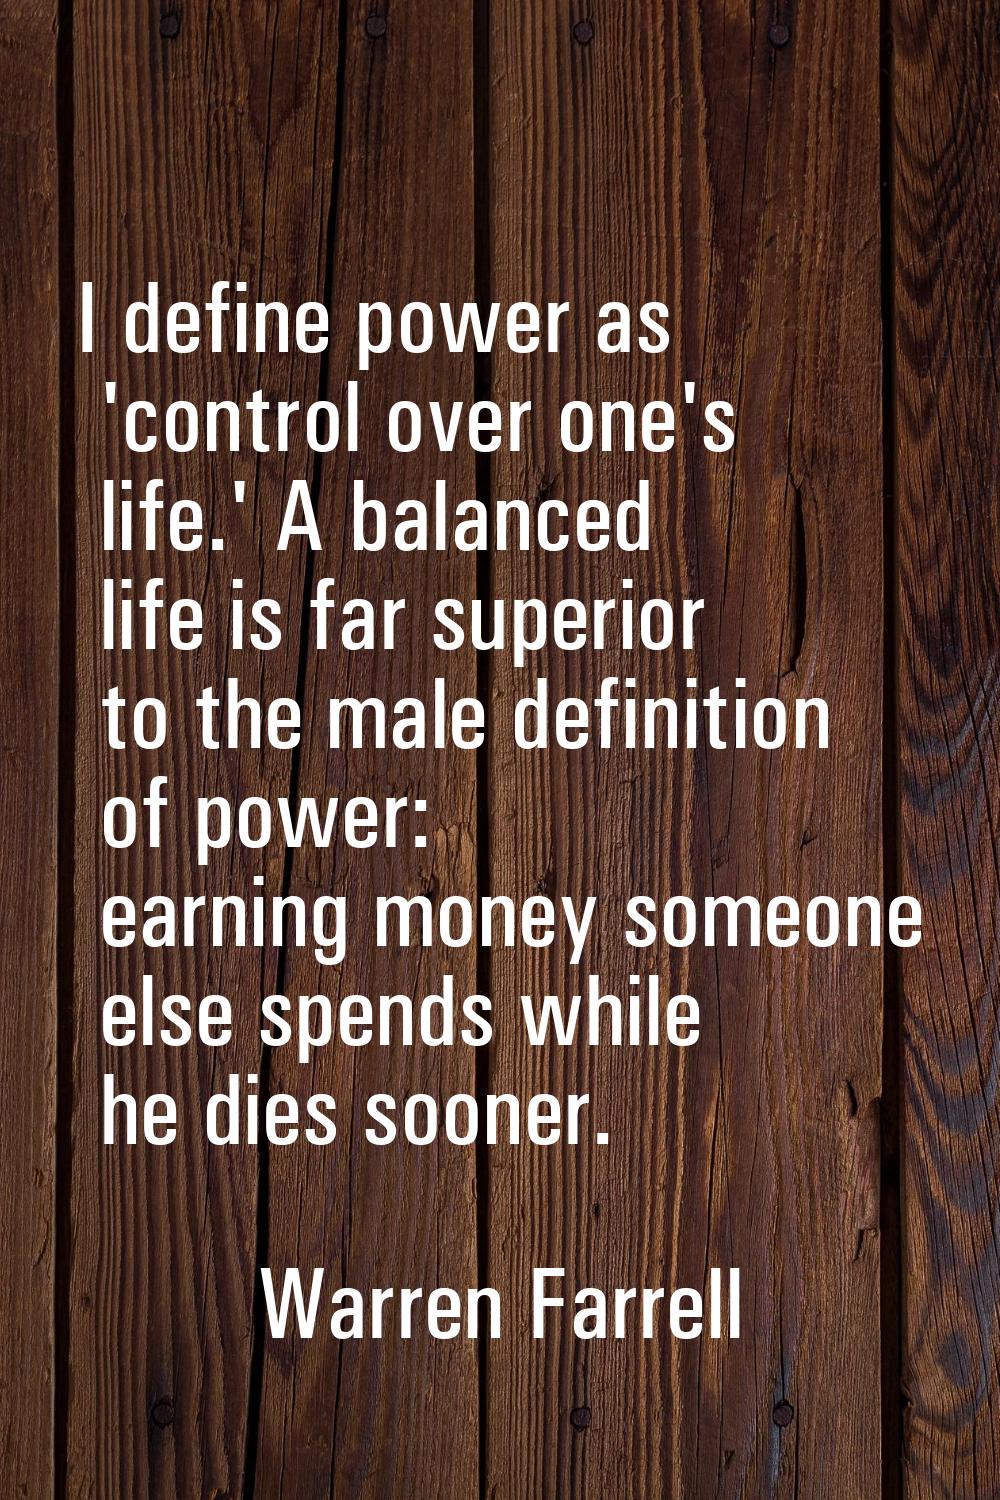 I define power as 'control over one's life.' A balanced life is far superior to the male definition